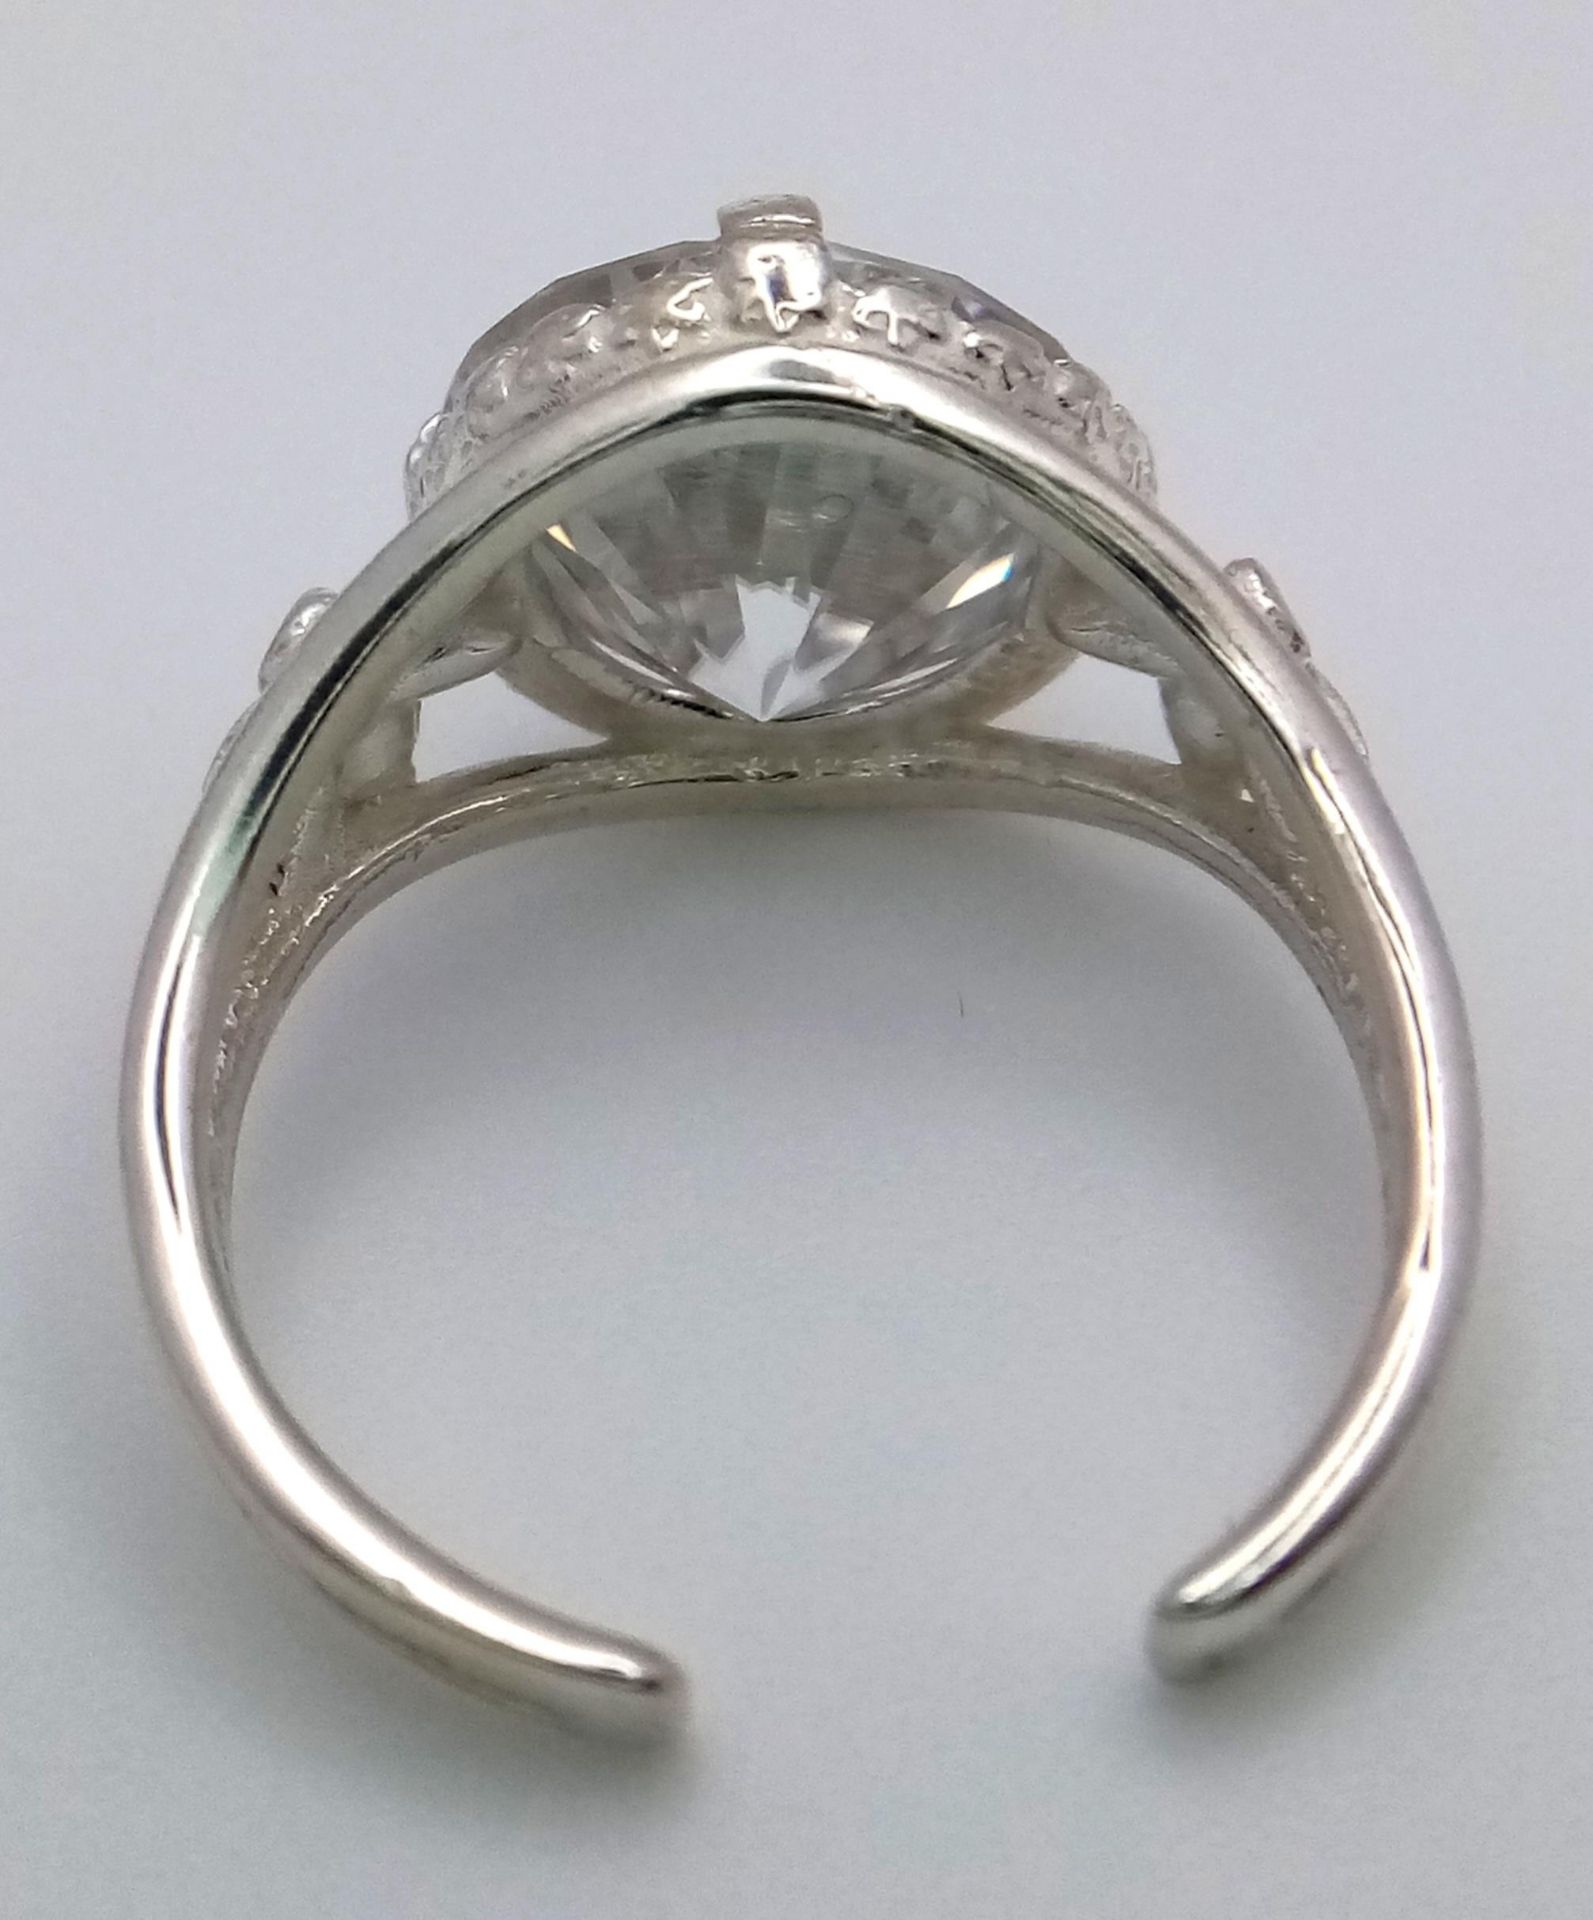 A 5ct Moissanite and 925 Silver Open-Ended Ring. Comes with a GRA certificate. - Image 4 of 5